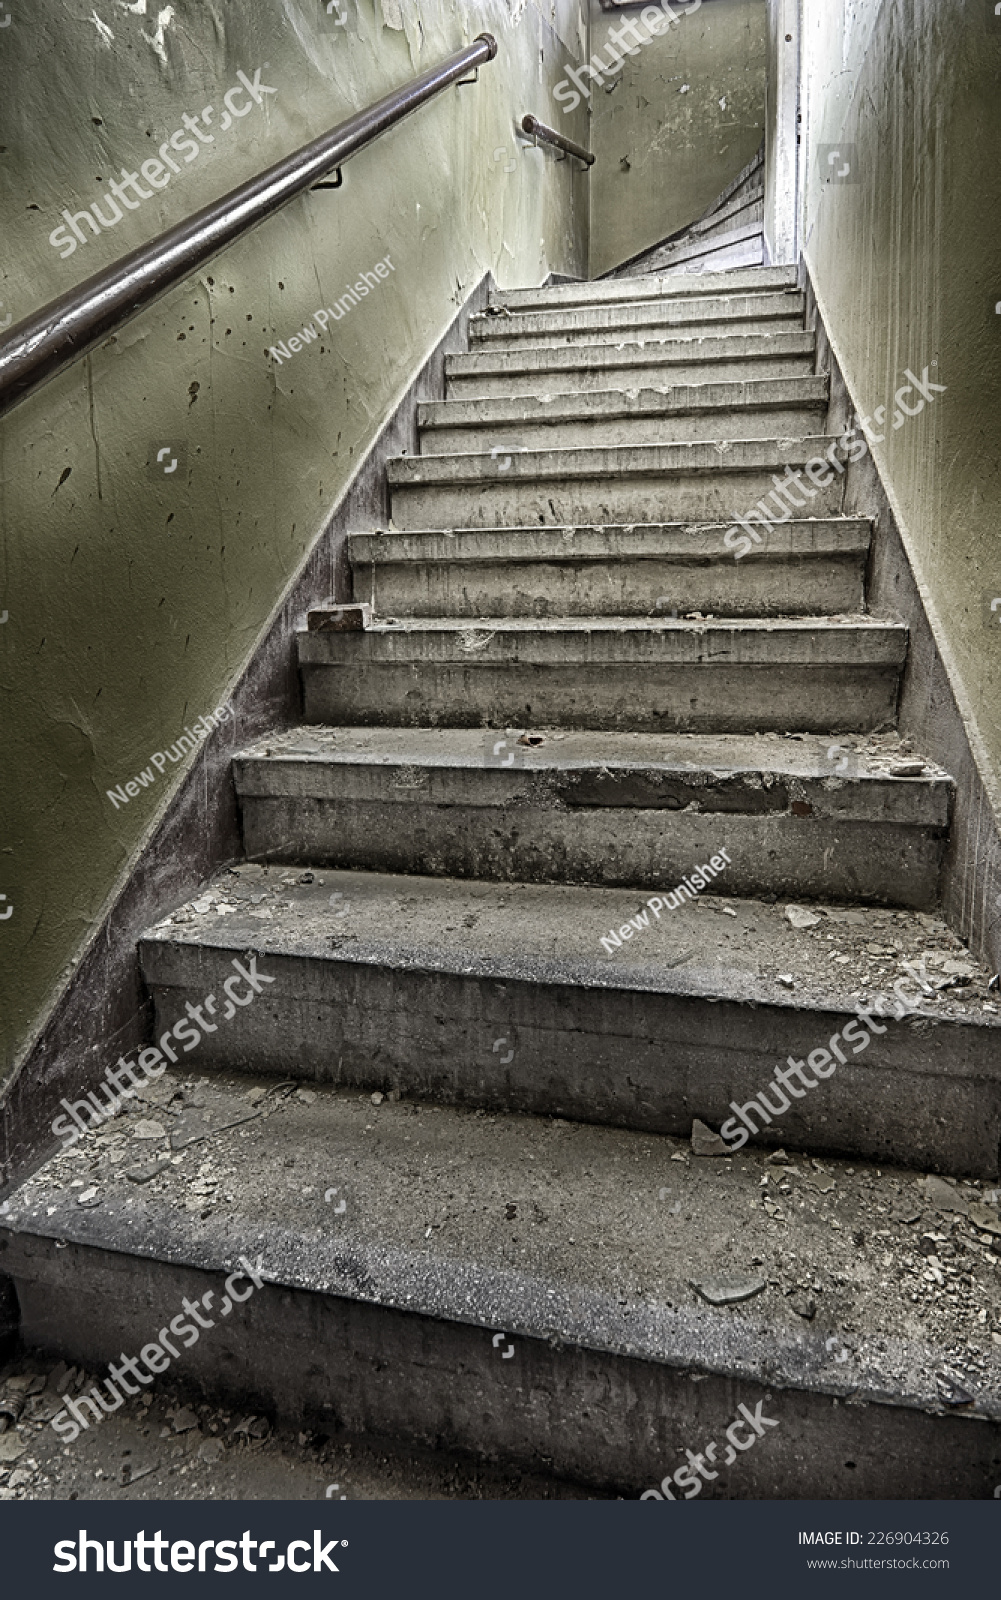 Devastated and destroyed the stairs in the stairwell #226904326